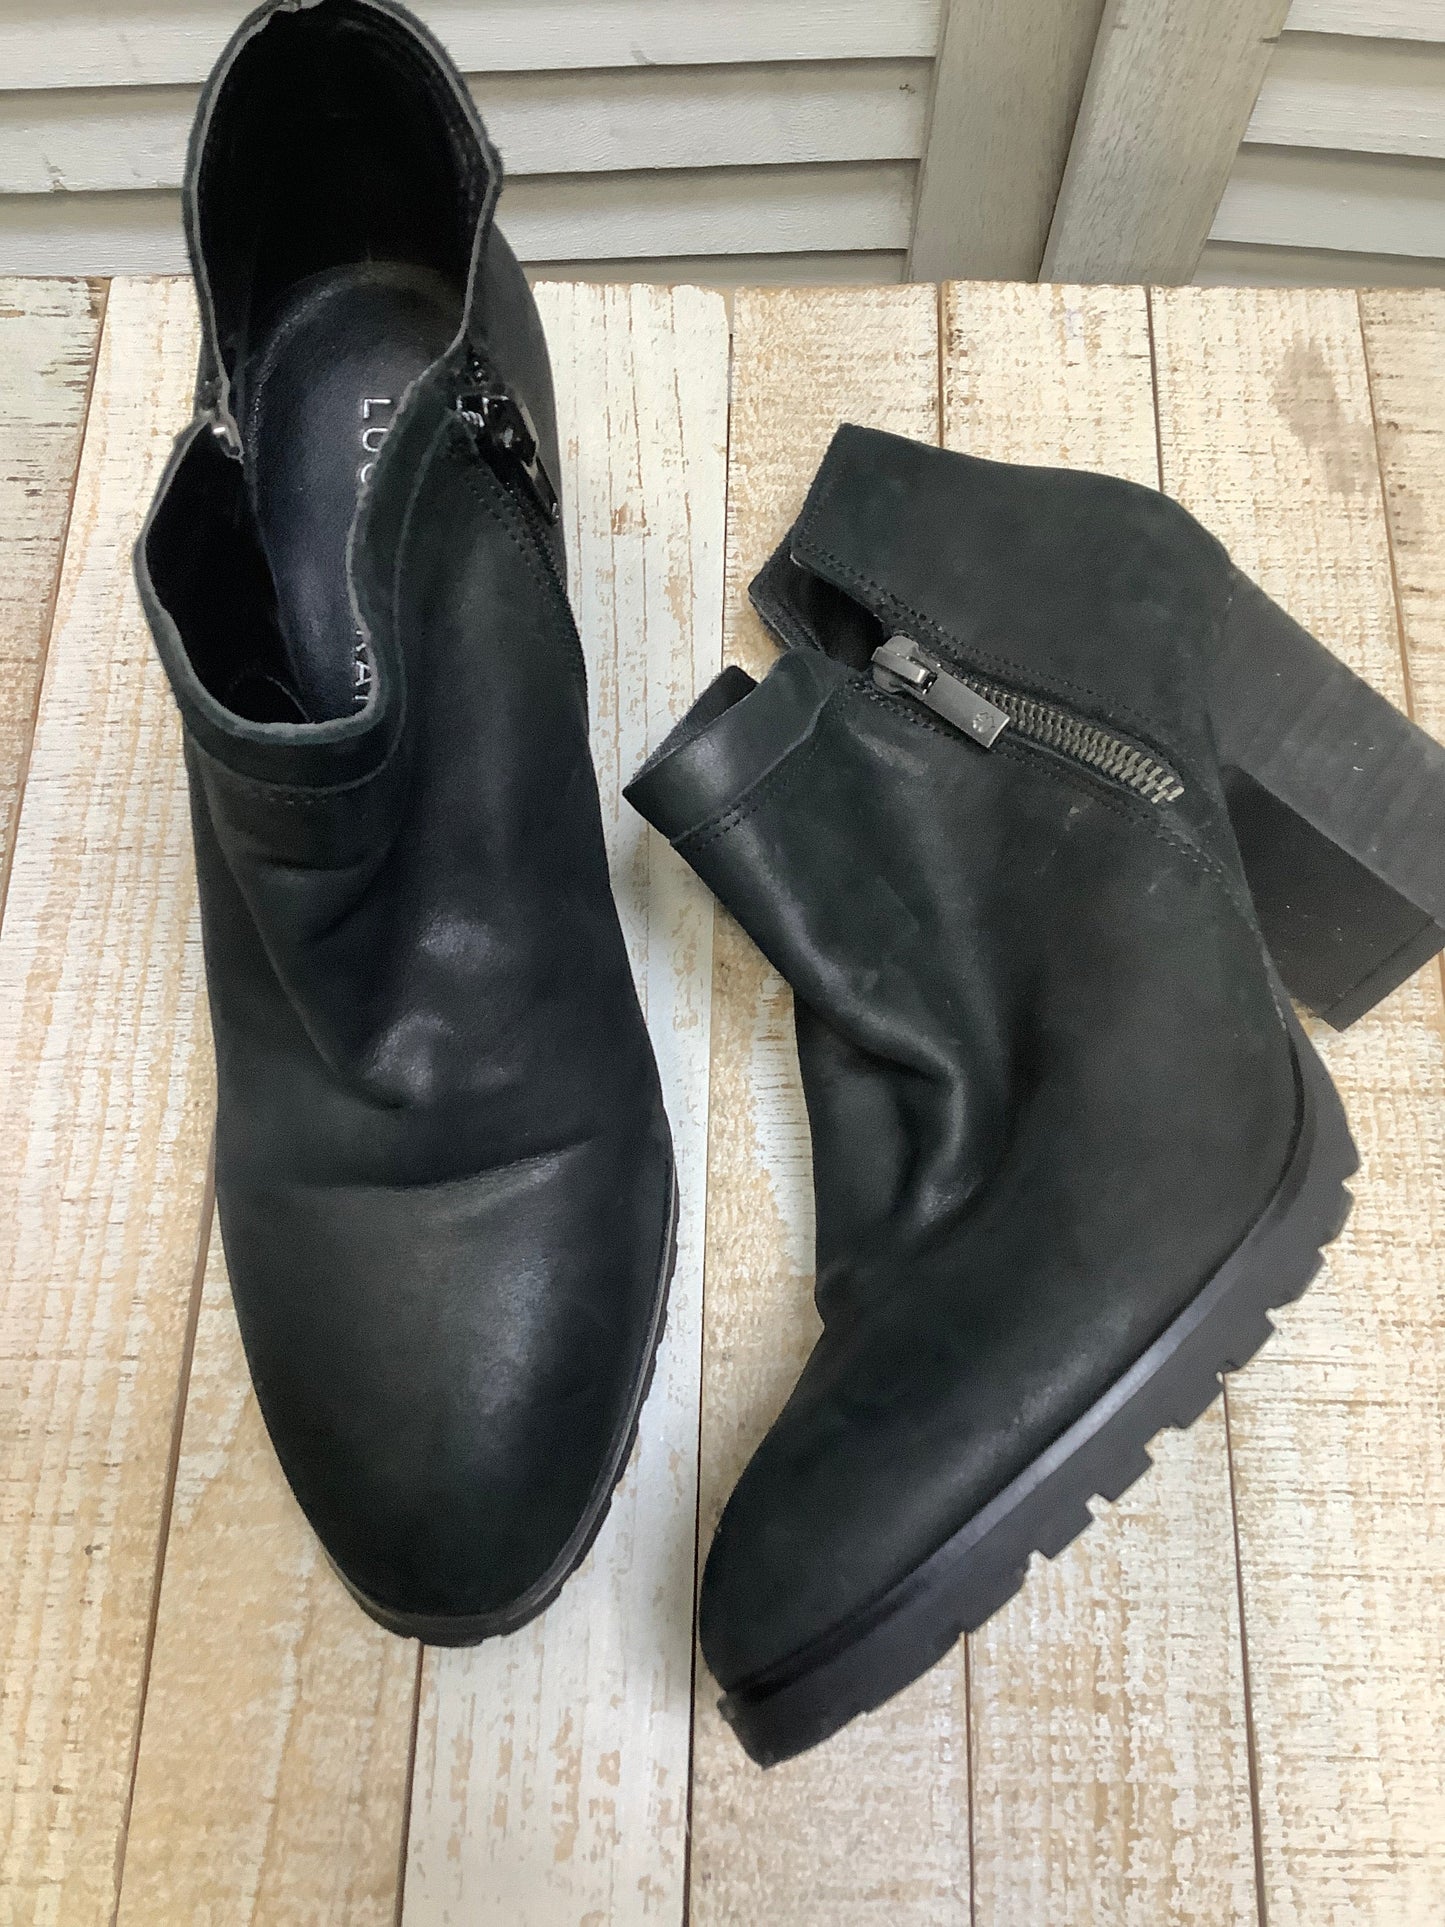 Black Boots Ankle Heels Lucky Brand, Size 7.5